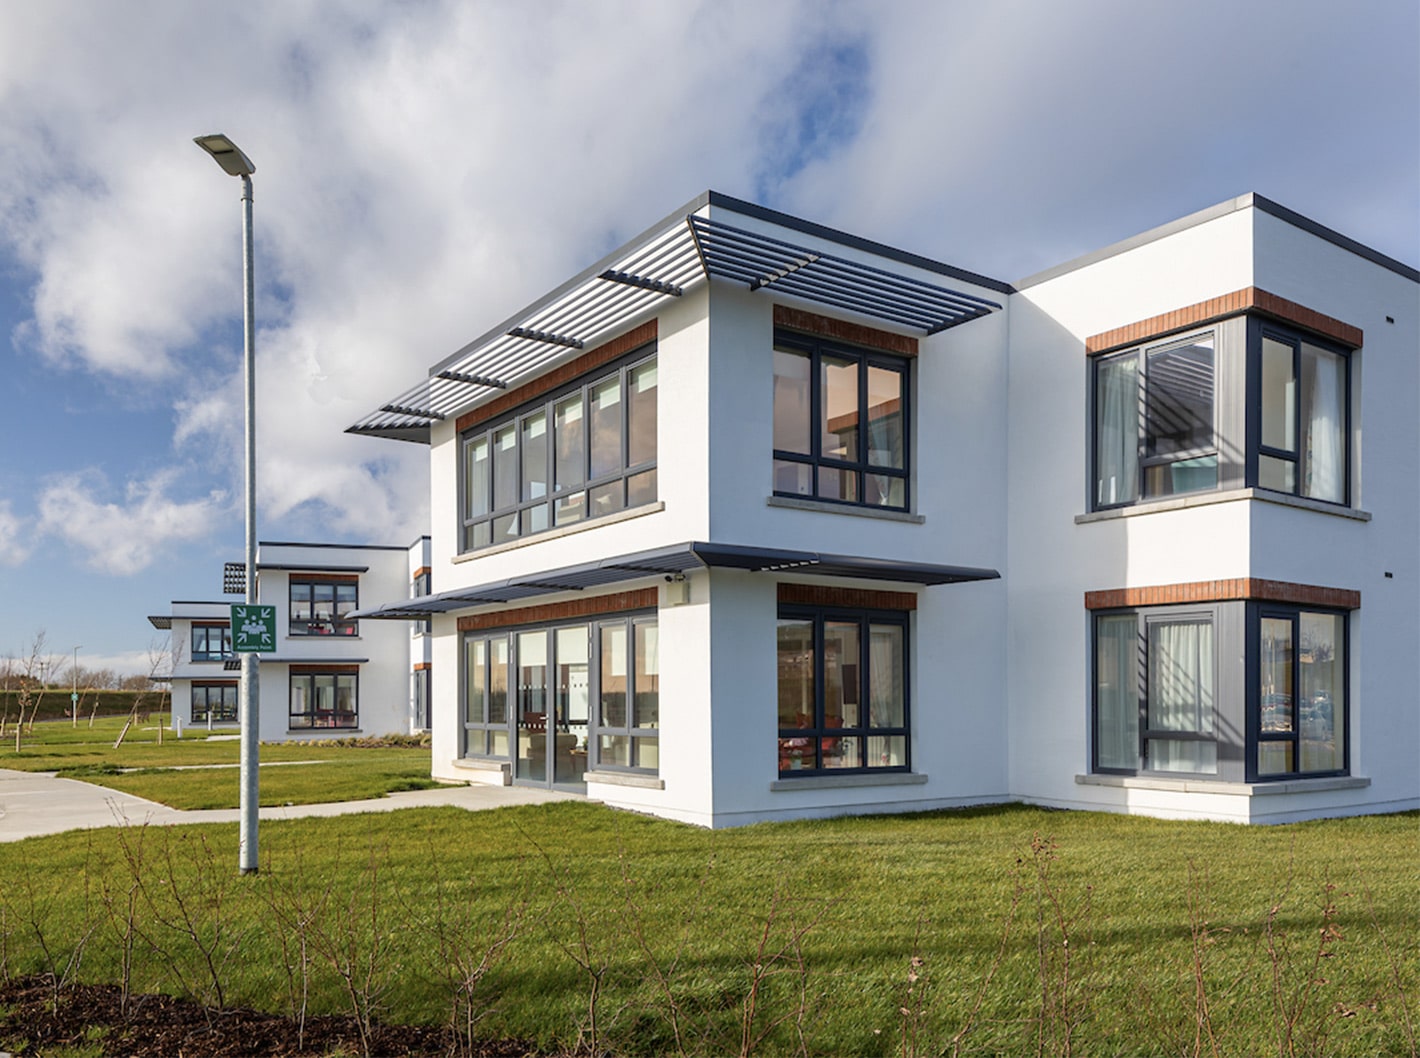 Impact Investing – The potential of Social Housing and Nursing Homes in Ireland